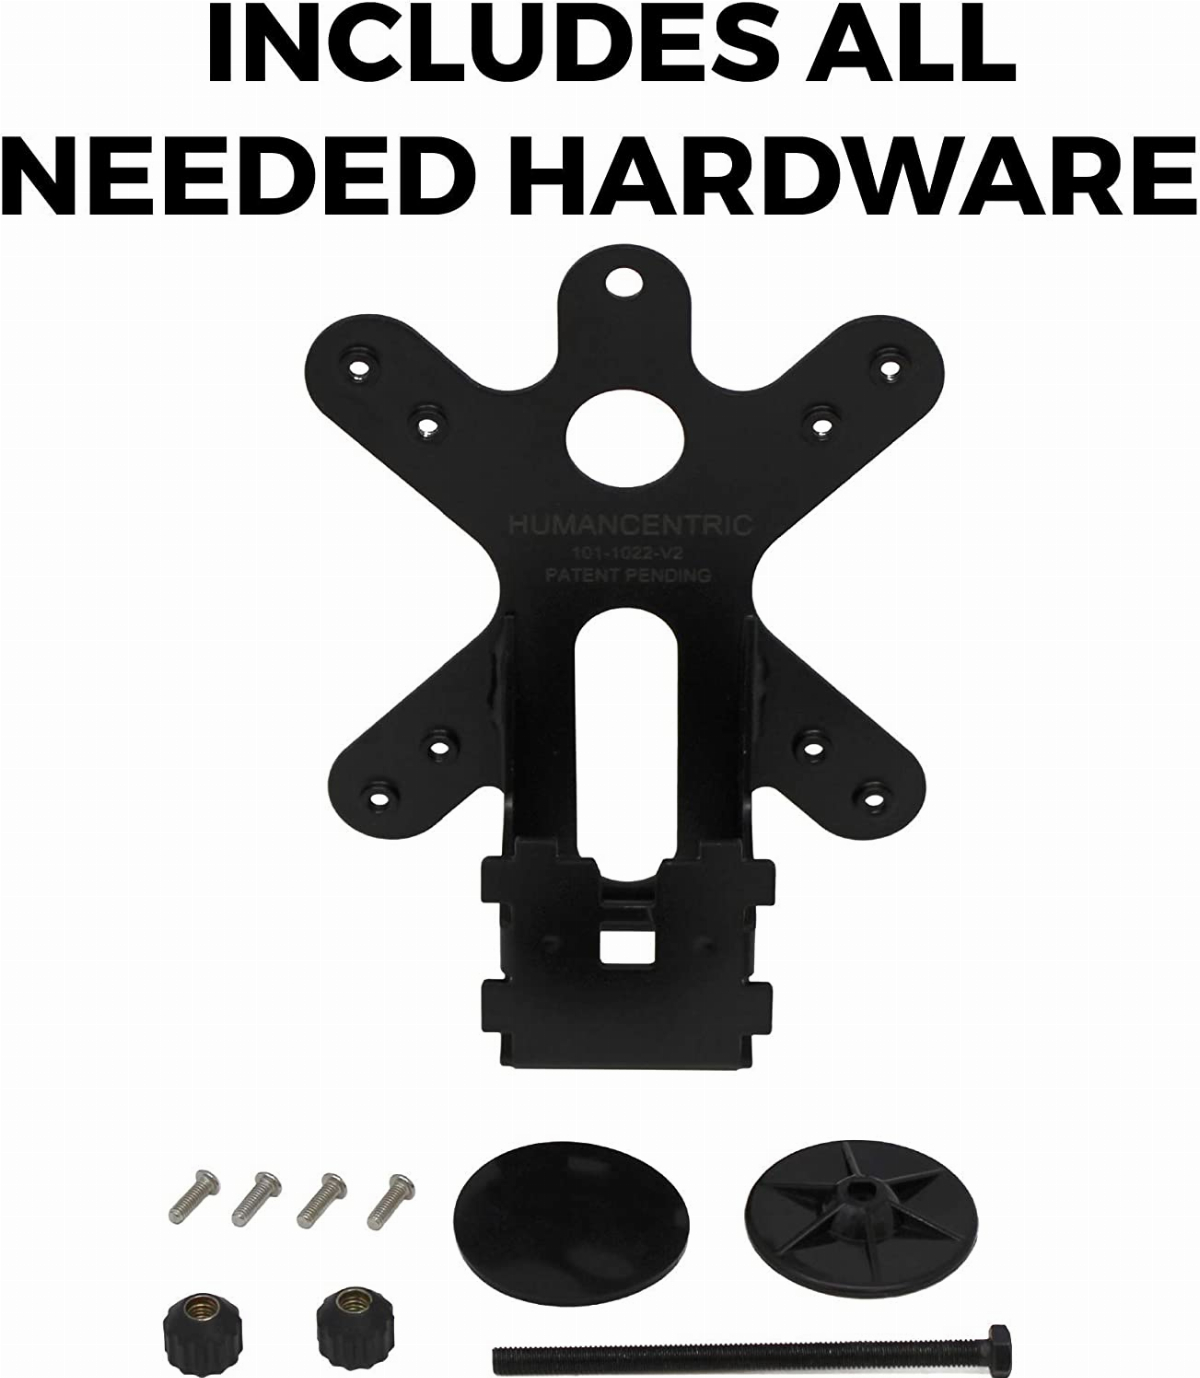 humancentric vesa mount adapter for dell s2218